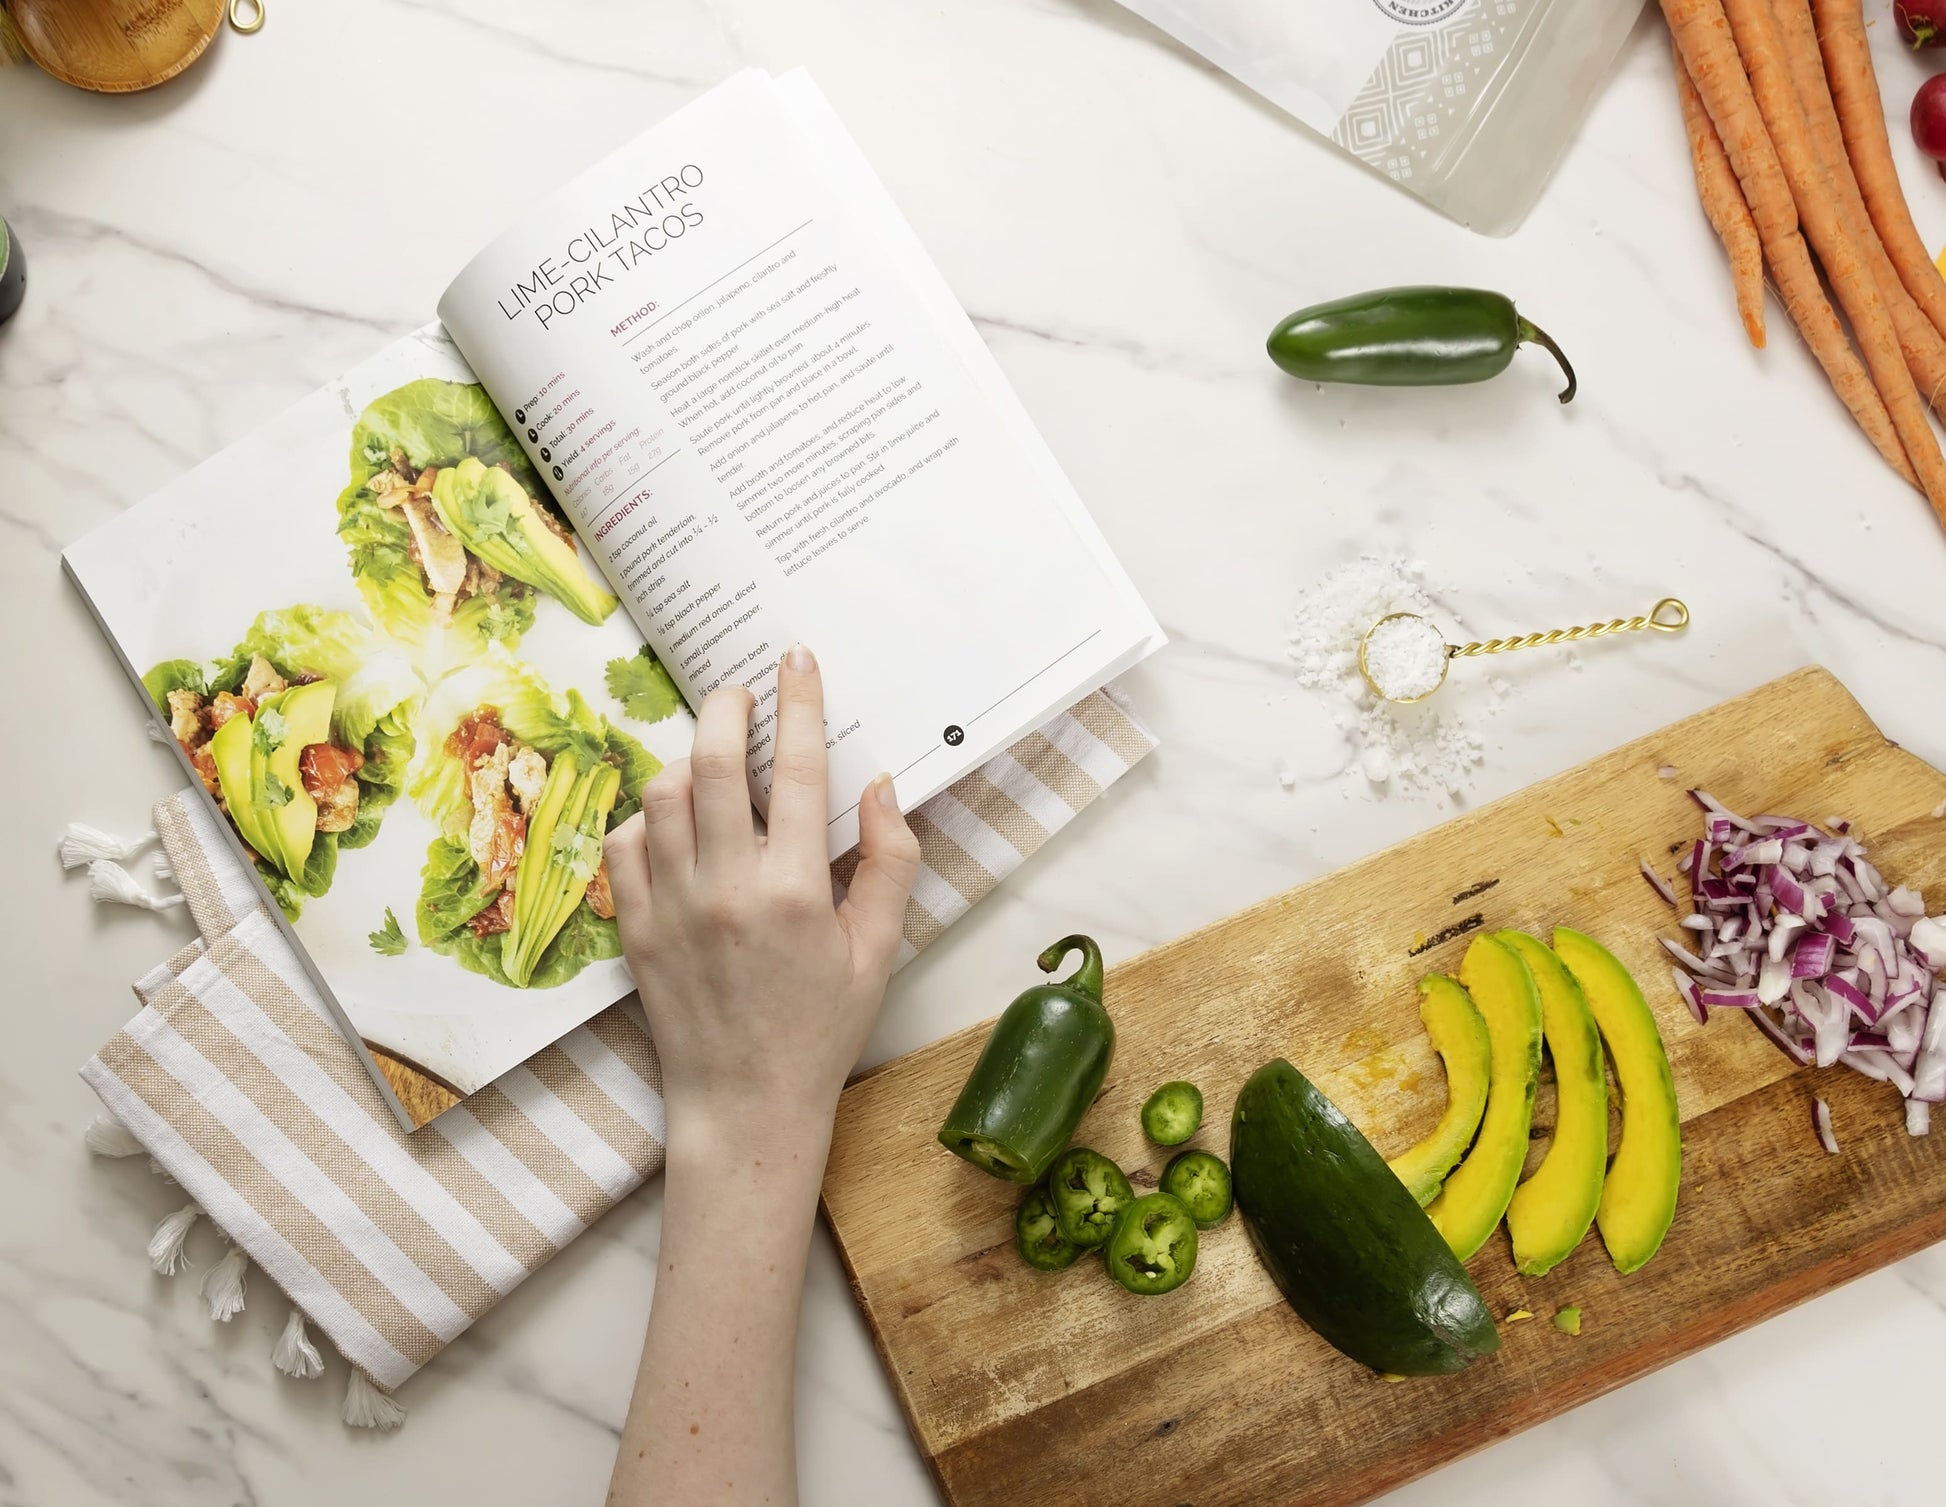 An open Thyroid Rebook cookbook laid on a kitchen cloth, placed on a plain marble surface, next to a wooden board with sliced vegetables and avocado.